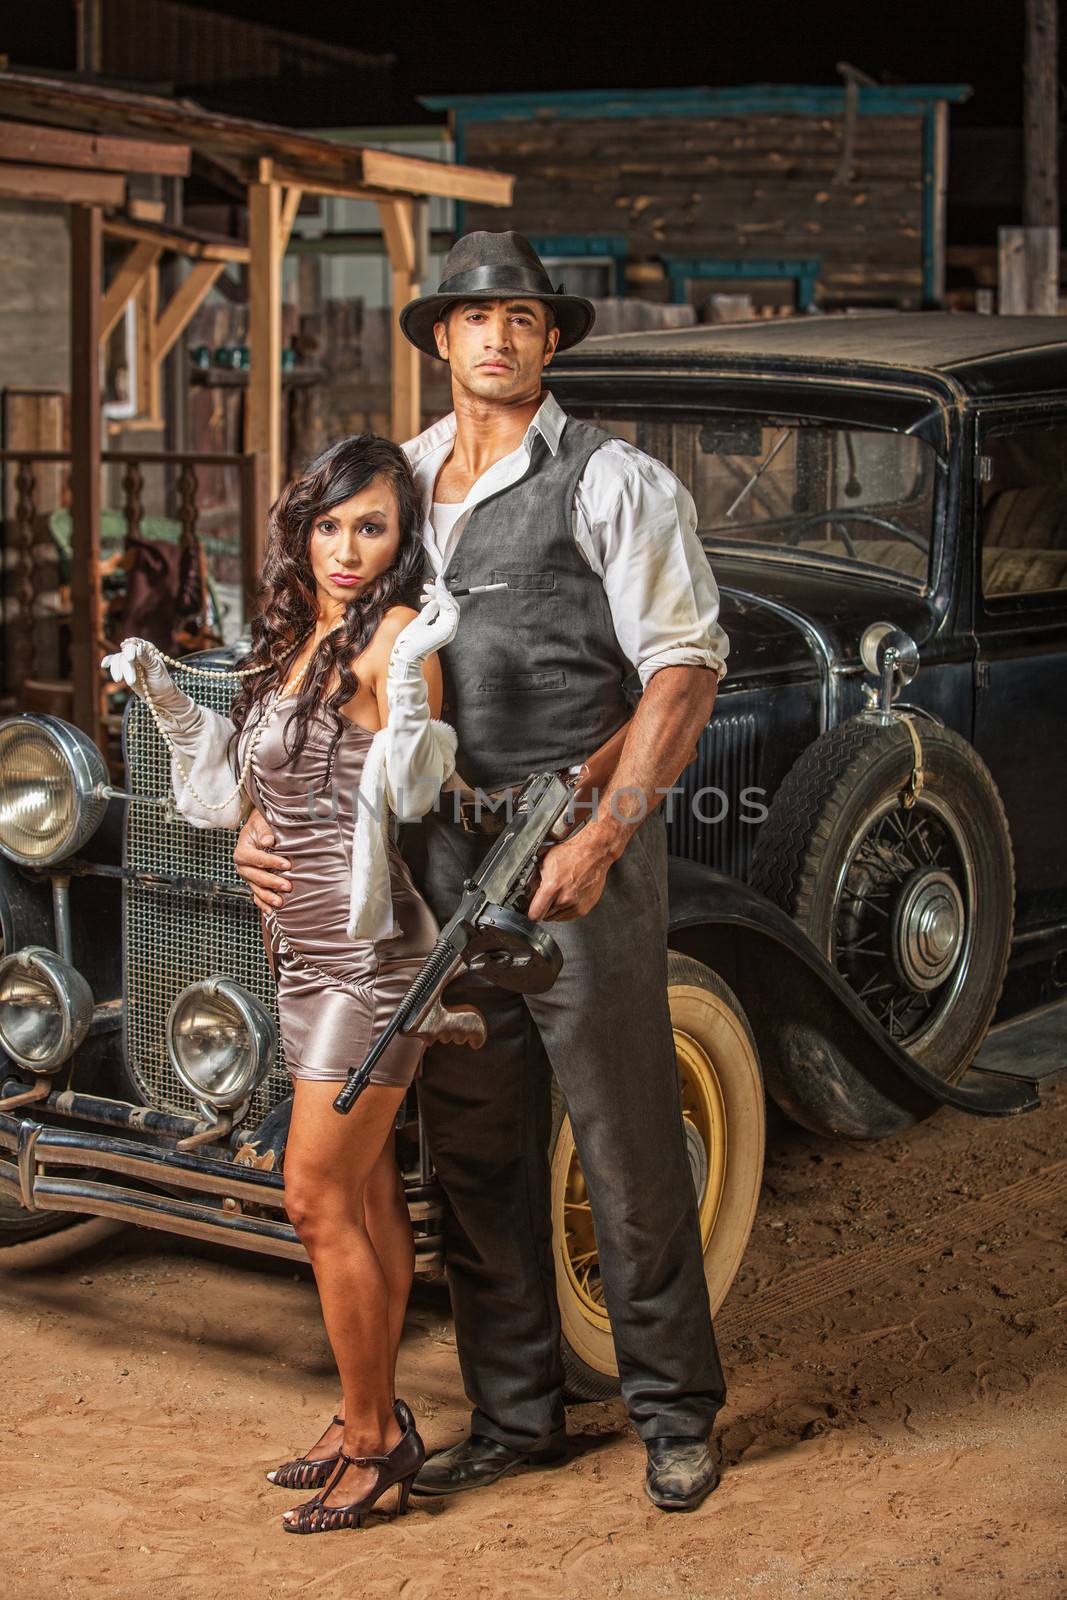 Handsome muscular 1920s gangster with lady in mini skirt